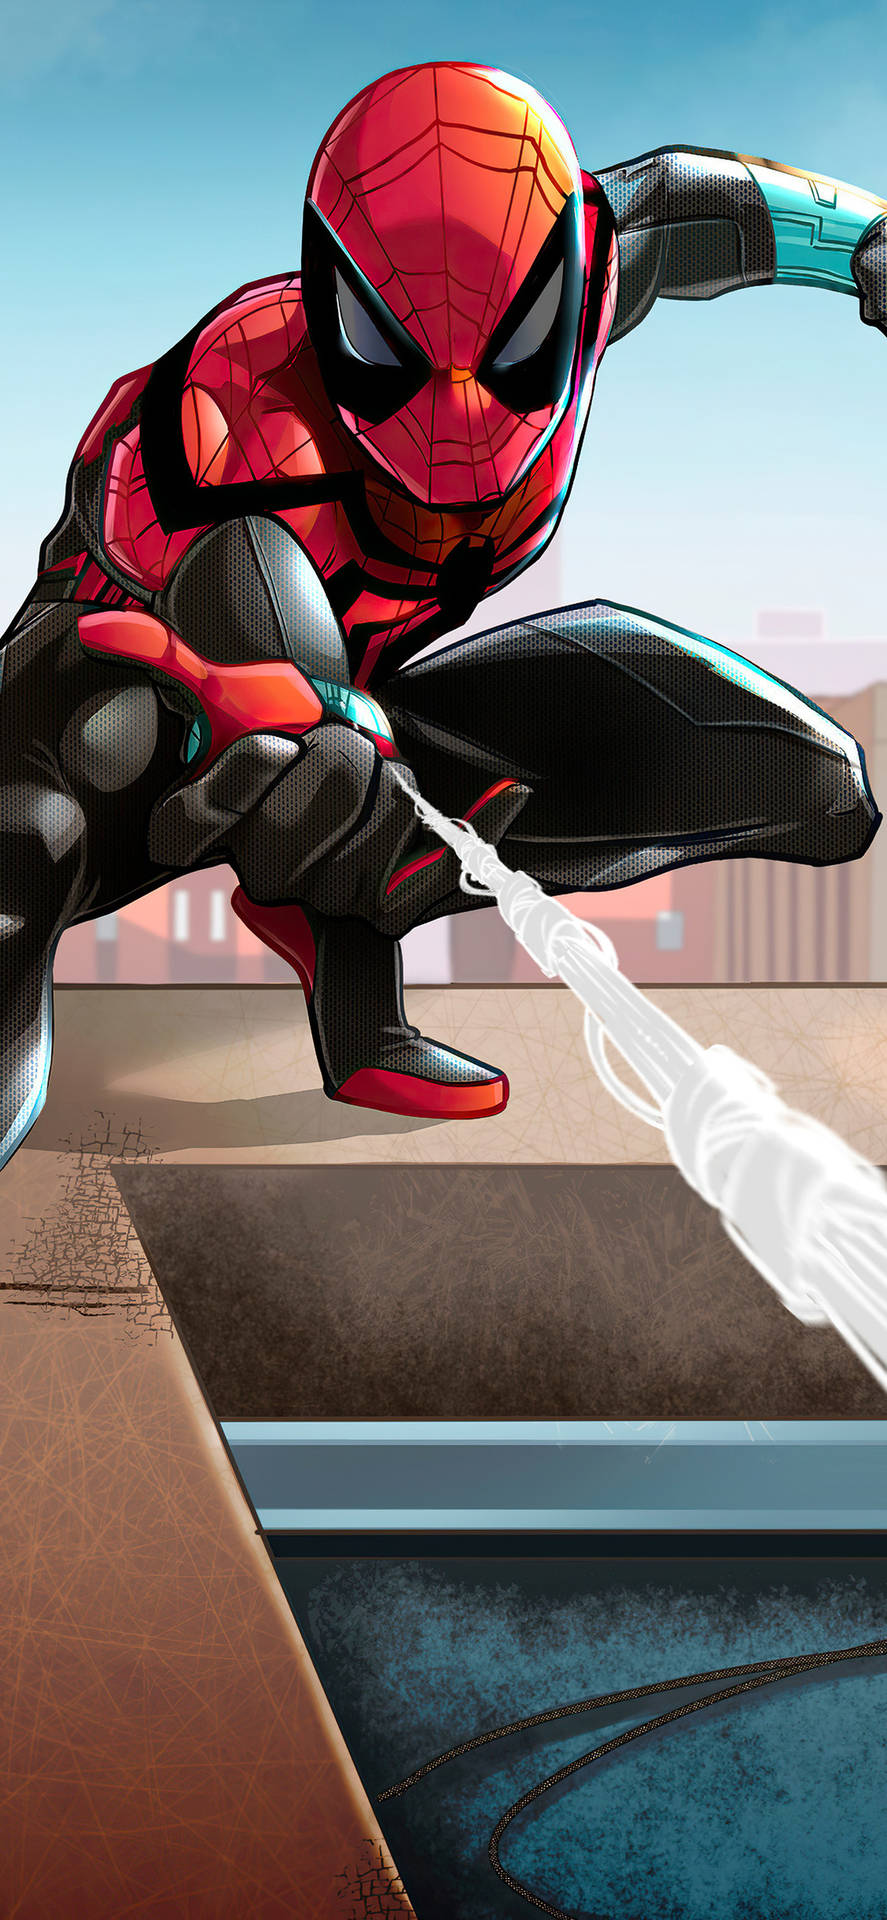 The Superior Spider-man Shooting A Web Wallpaper